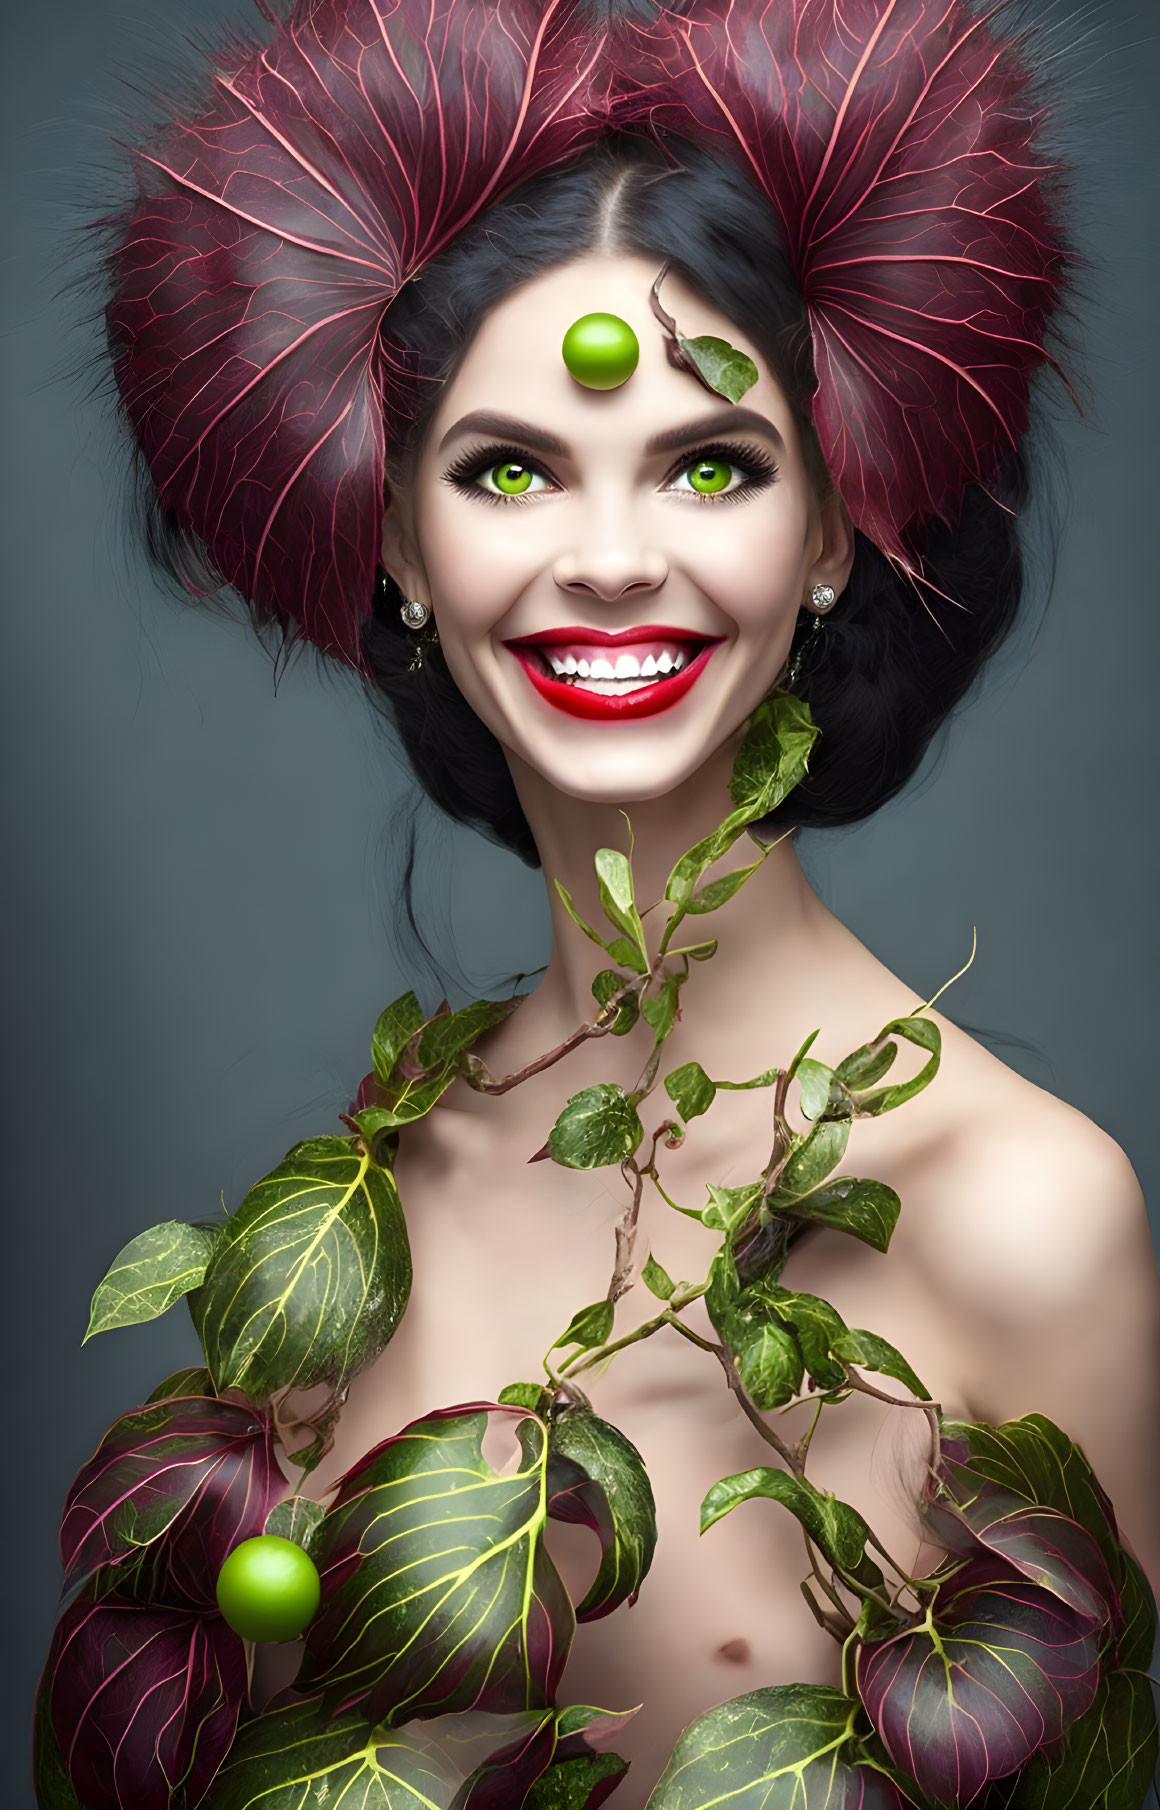 Smiling woman with red spiky hair and green ornament in stylized portrait